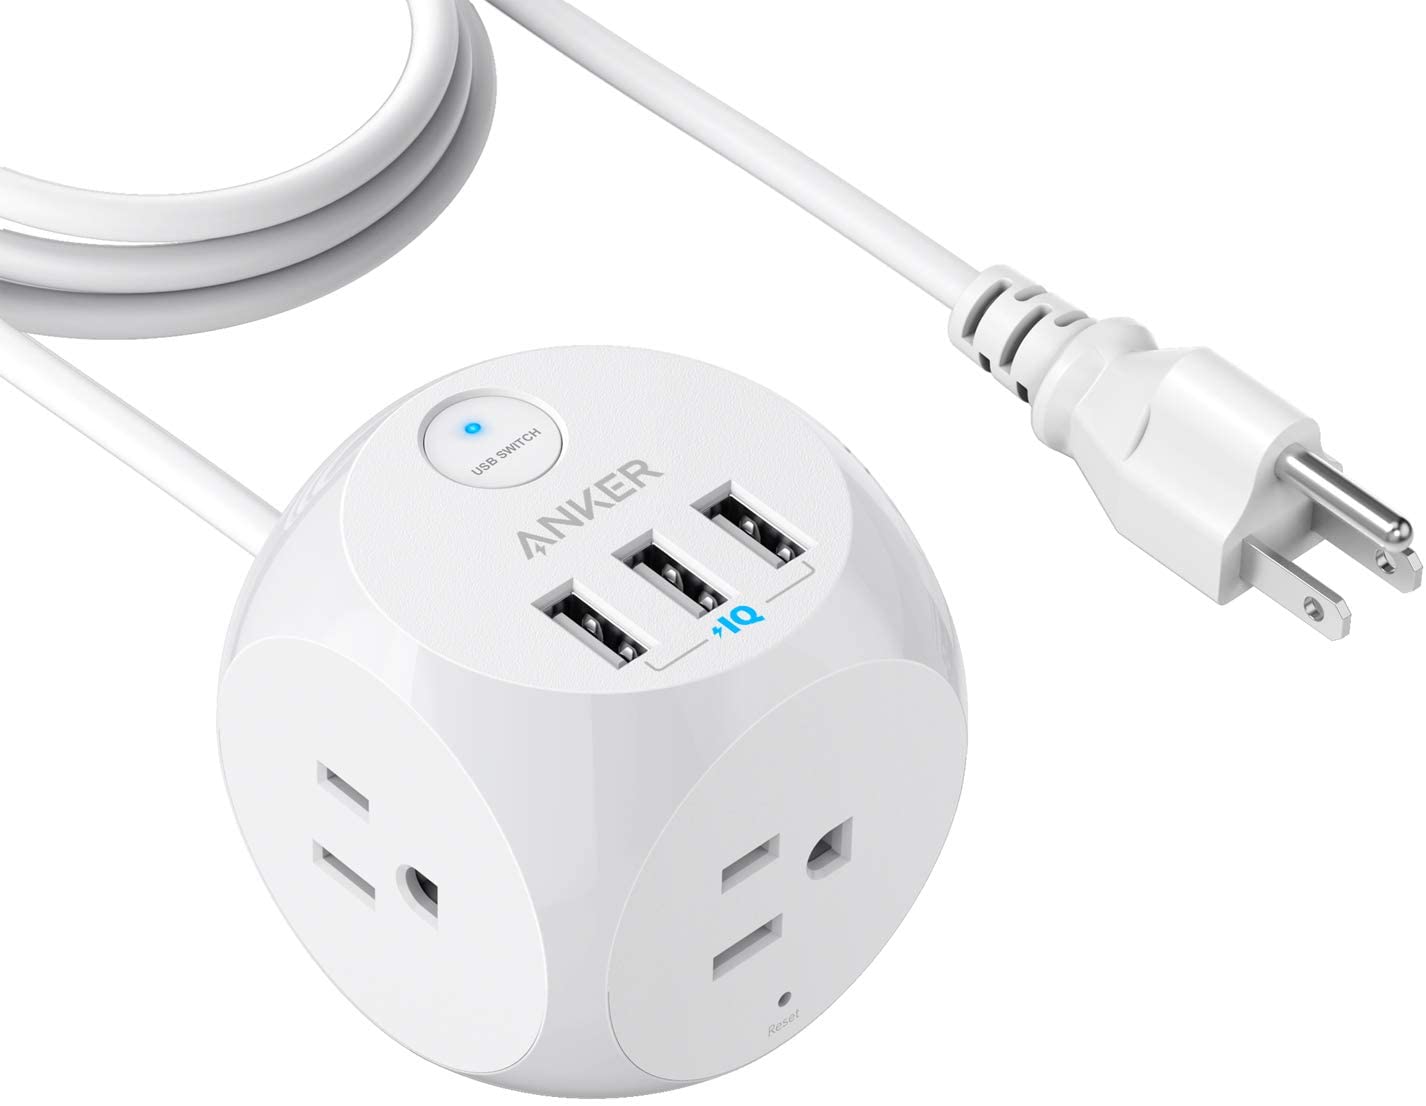 Anker Power Strip with USB, 5 ft Extension Cord, PowerPort Cube USB with 3 Outlets and 3 USB Ports $11.99 Live on 11/22 9:00 AM PST